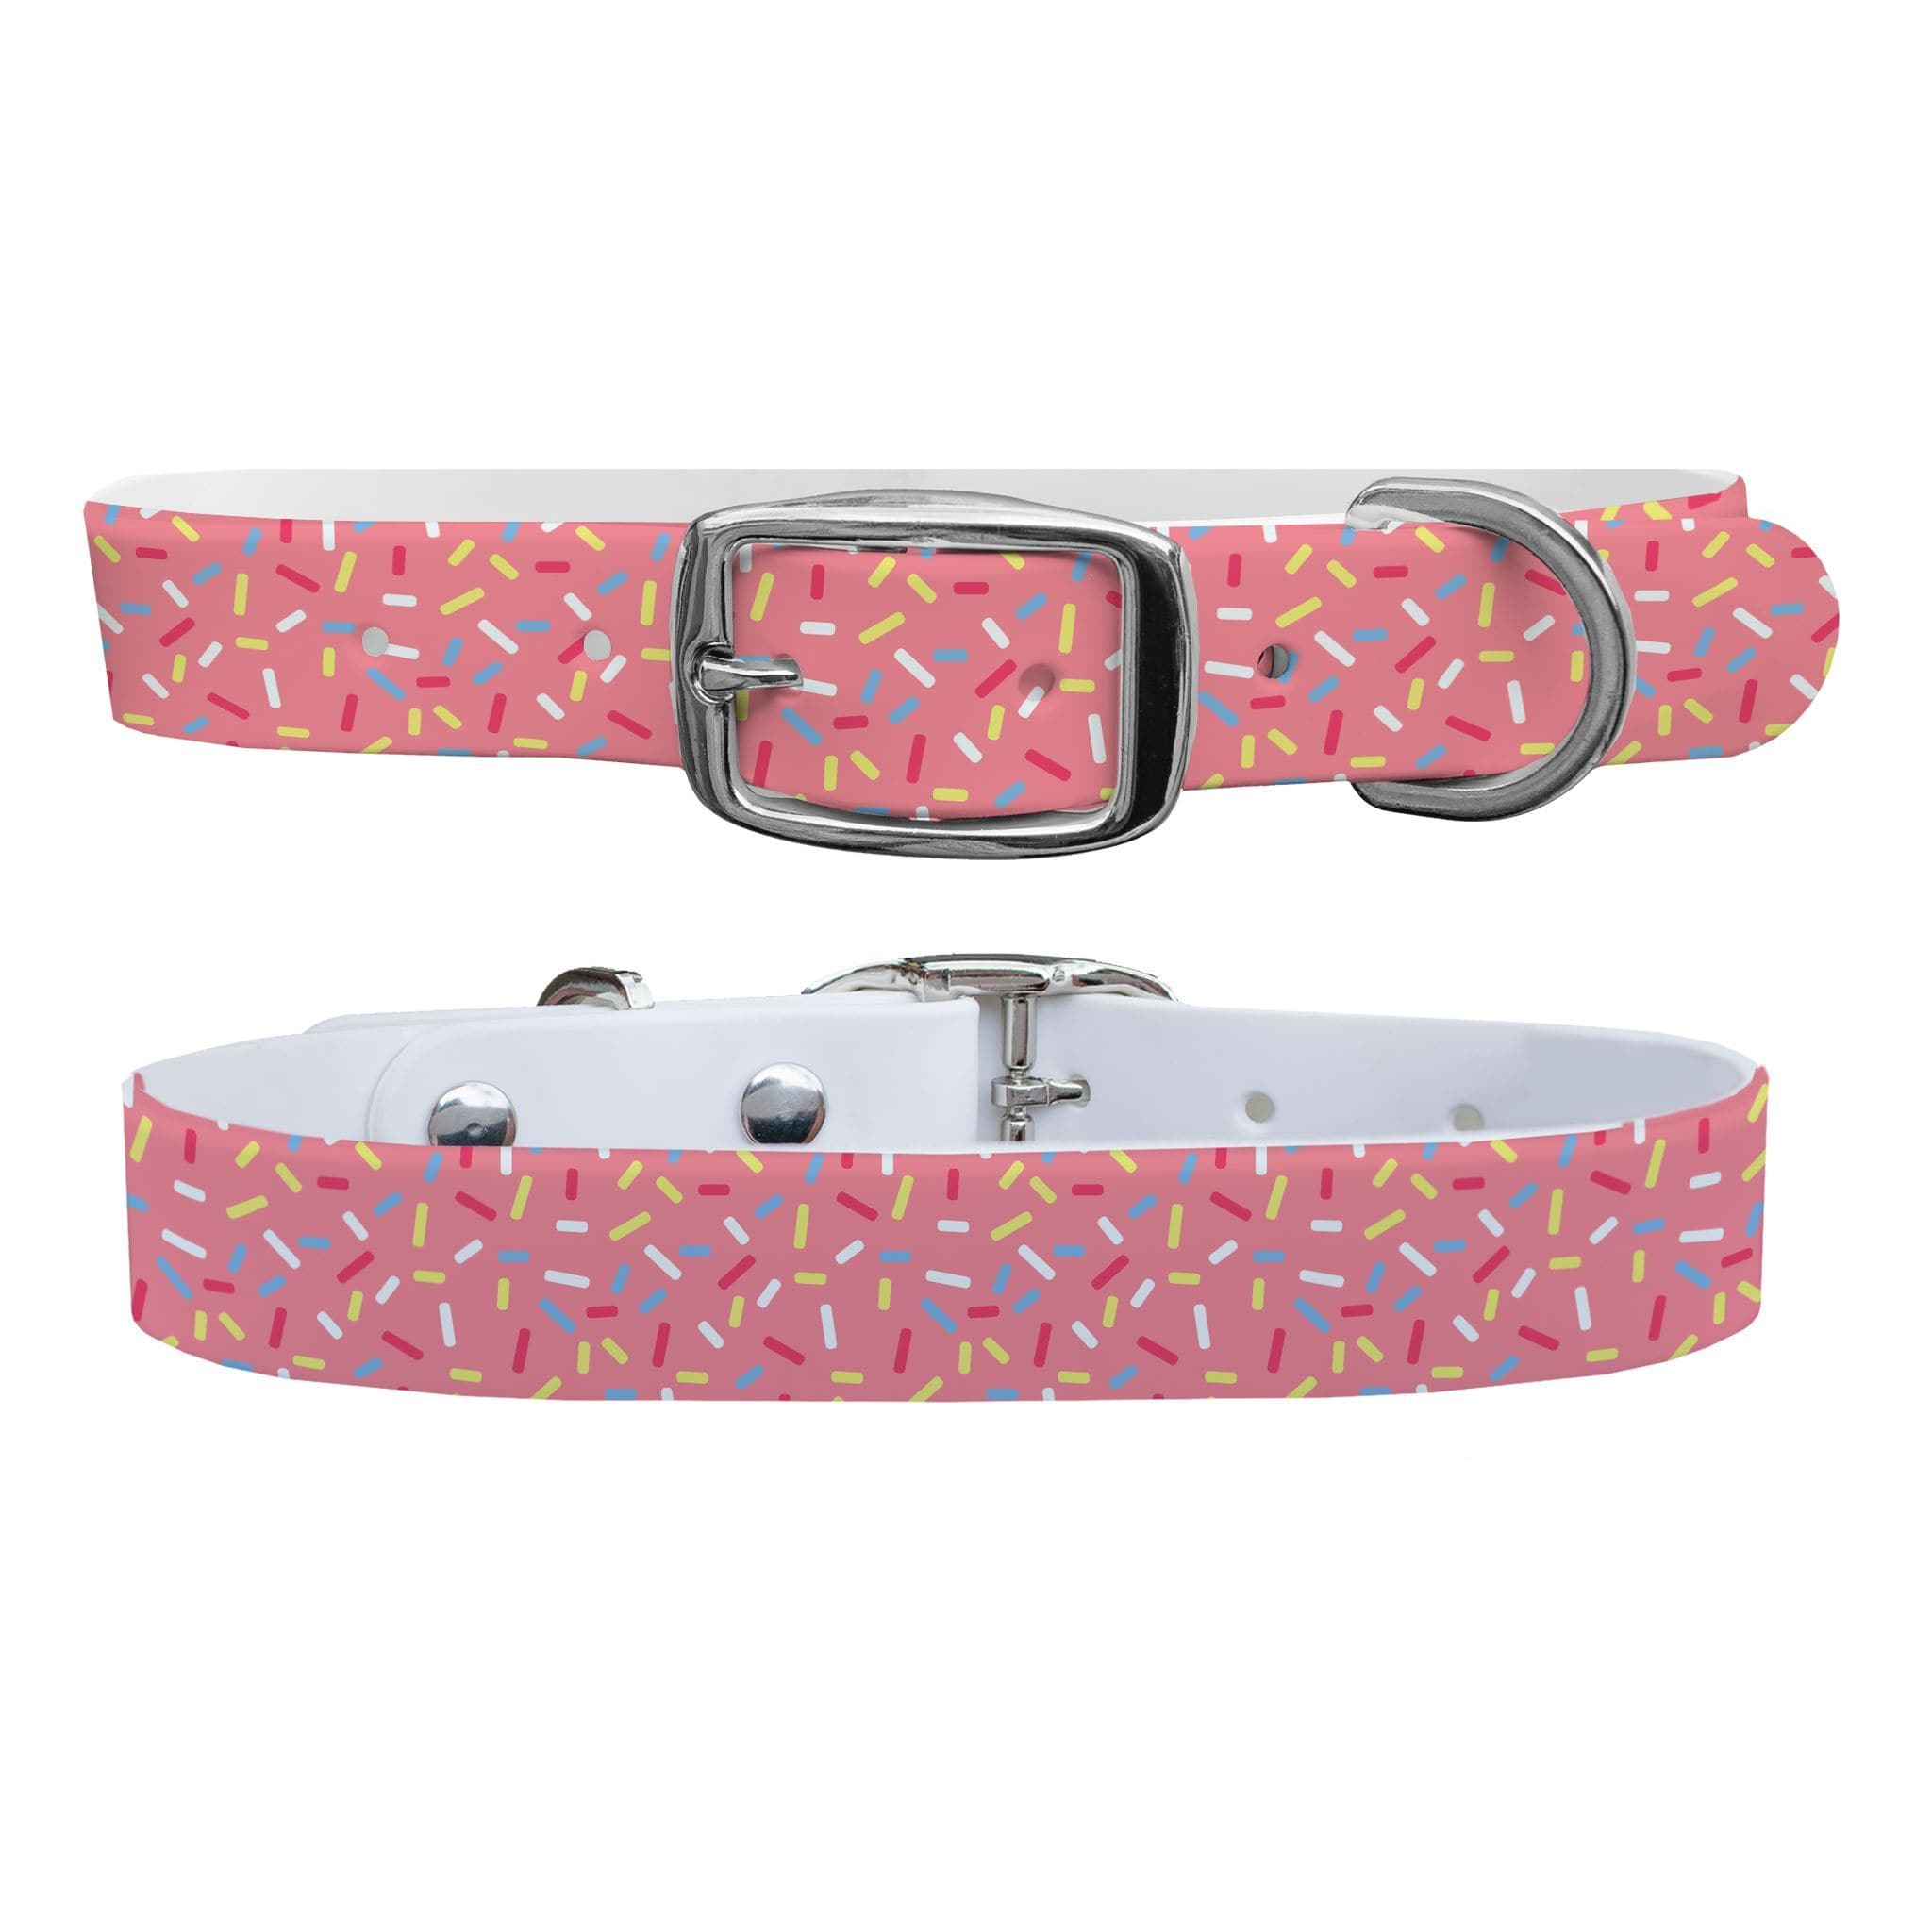 Sprinkles Dog Collar With Silver Buckle - X-Large